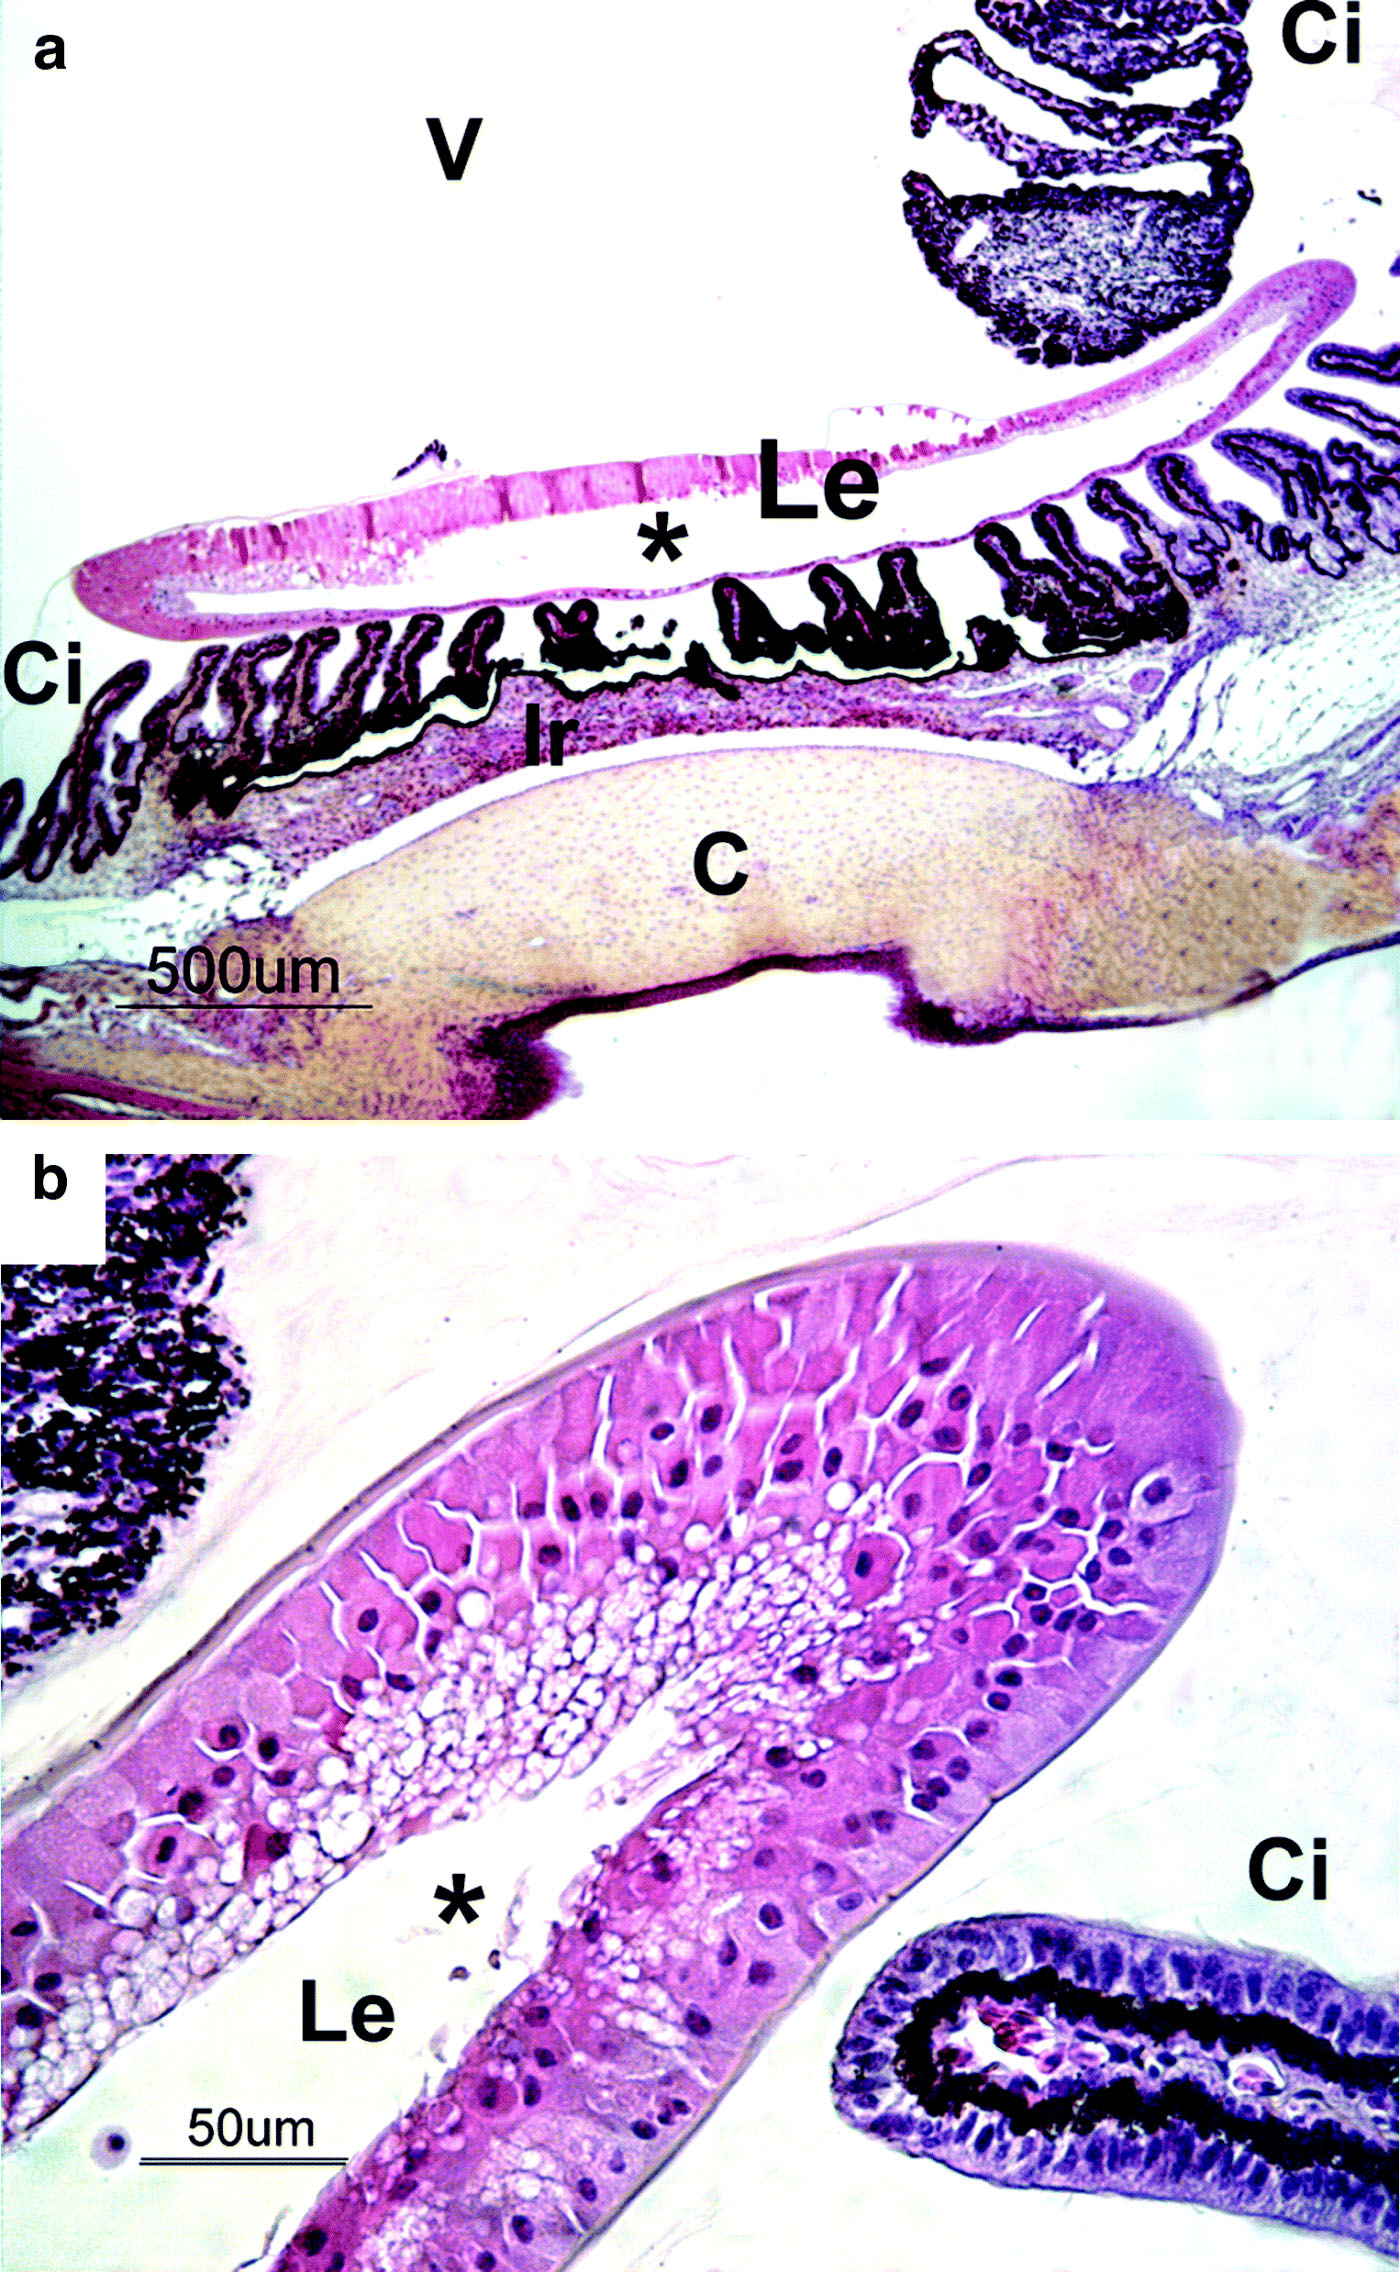 Figure 2.  Section of the eye from a 1-day-old duck: (a) low magnification and (b) high magnification. The anterior cortex and the nucleus of the lens (Le) were replaced by an amorphous eosinophilic material (fibre liquefaction), forming a cavity (*). Lenticular epithelial cells showed cytoplasm vacuolation and ballooning degeneration. C, cornea; Ci, ciliary bodies; Ir, iris; V, vitreous. Haematoxylin–eosin–saffron staining.